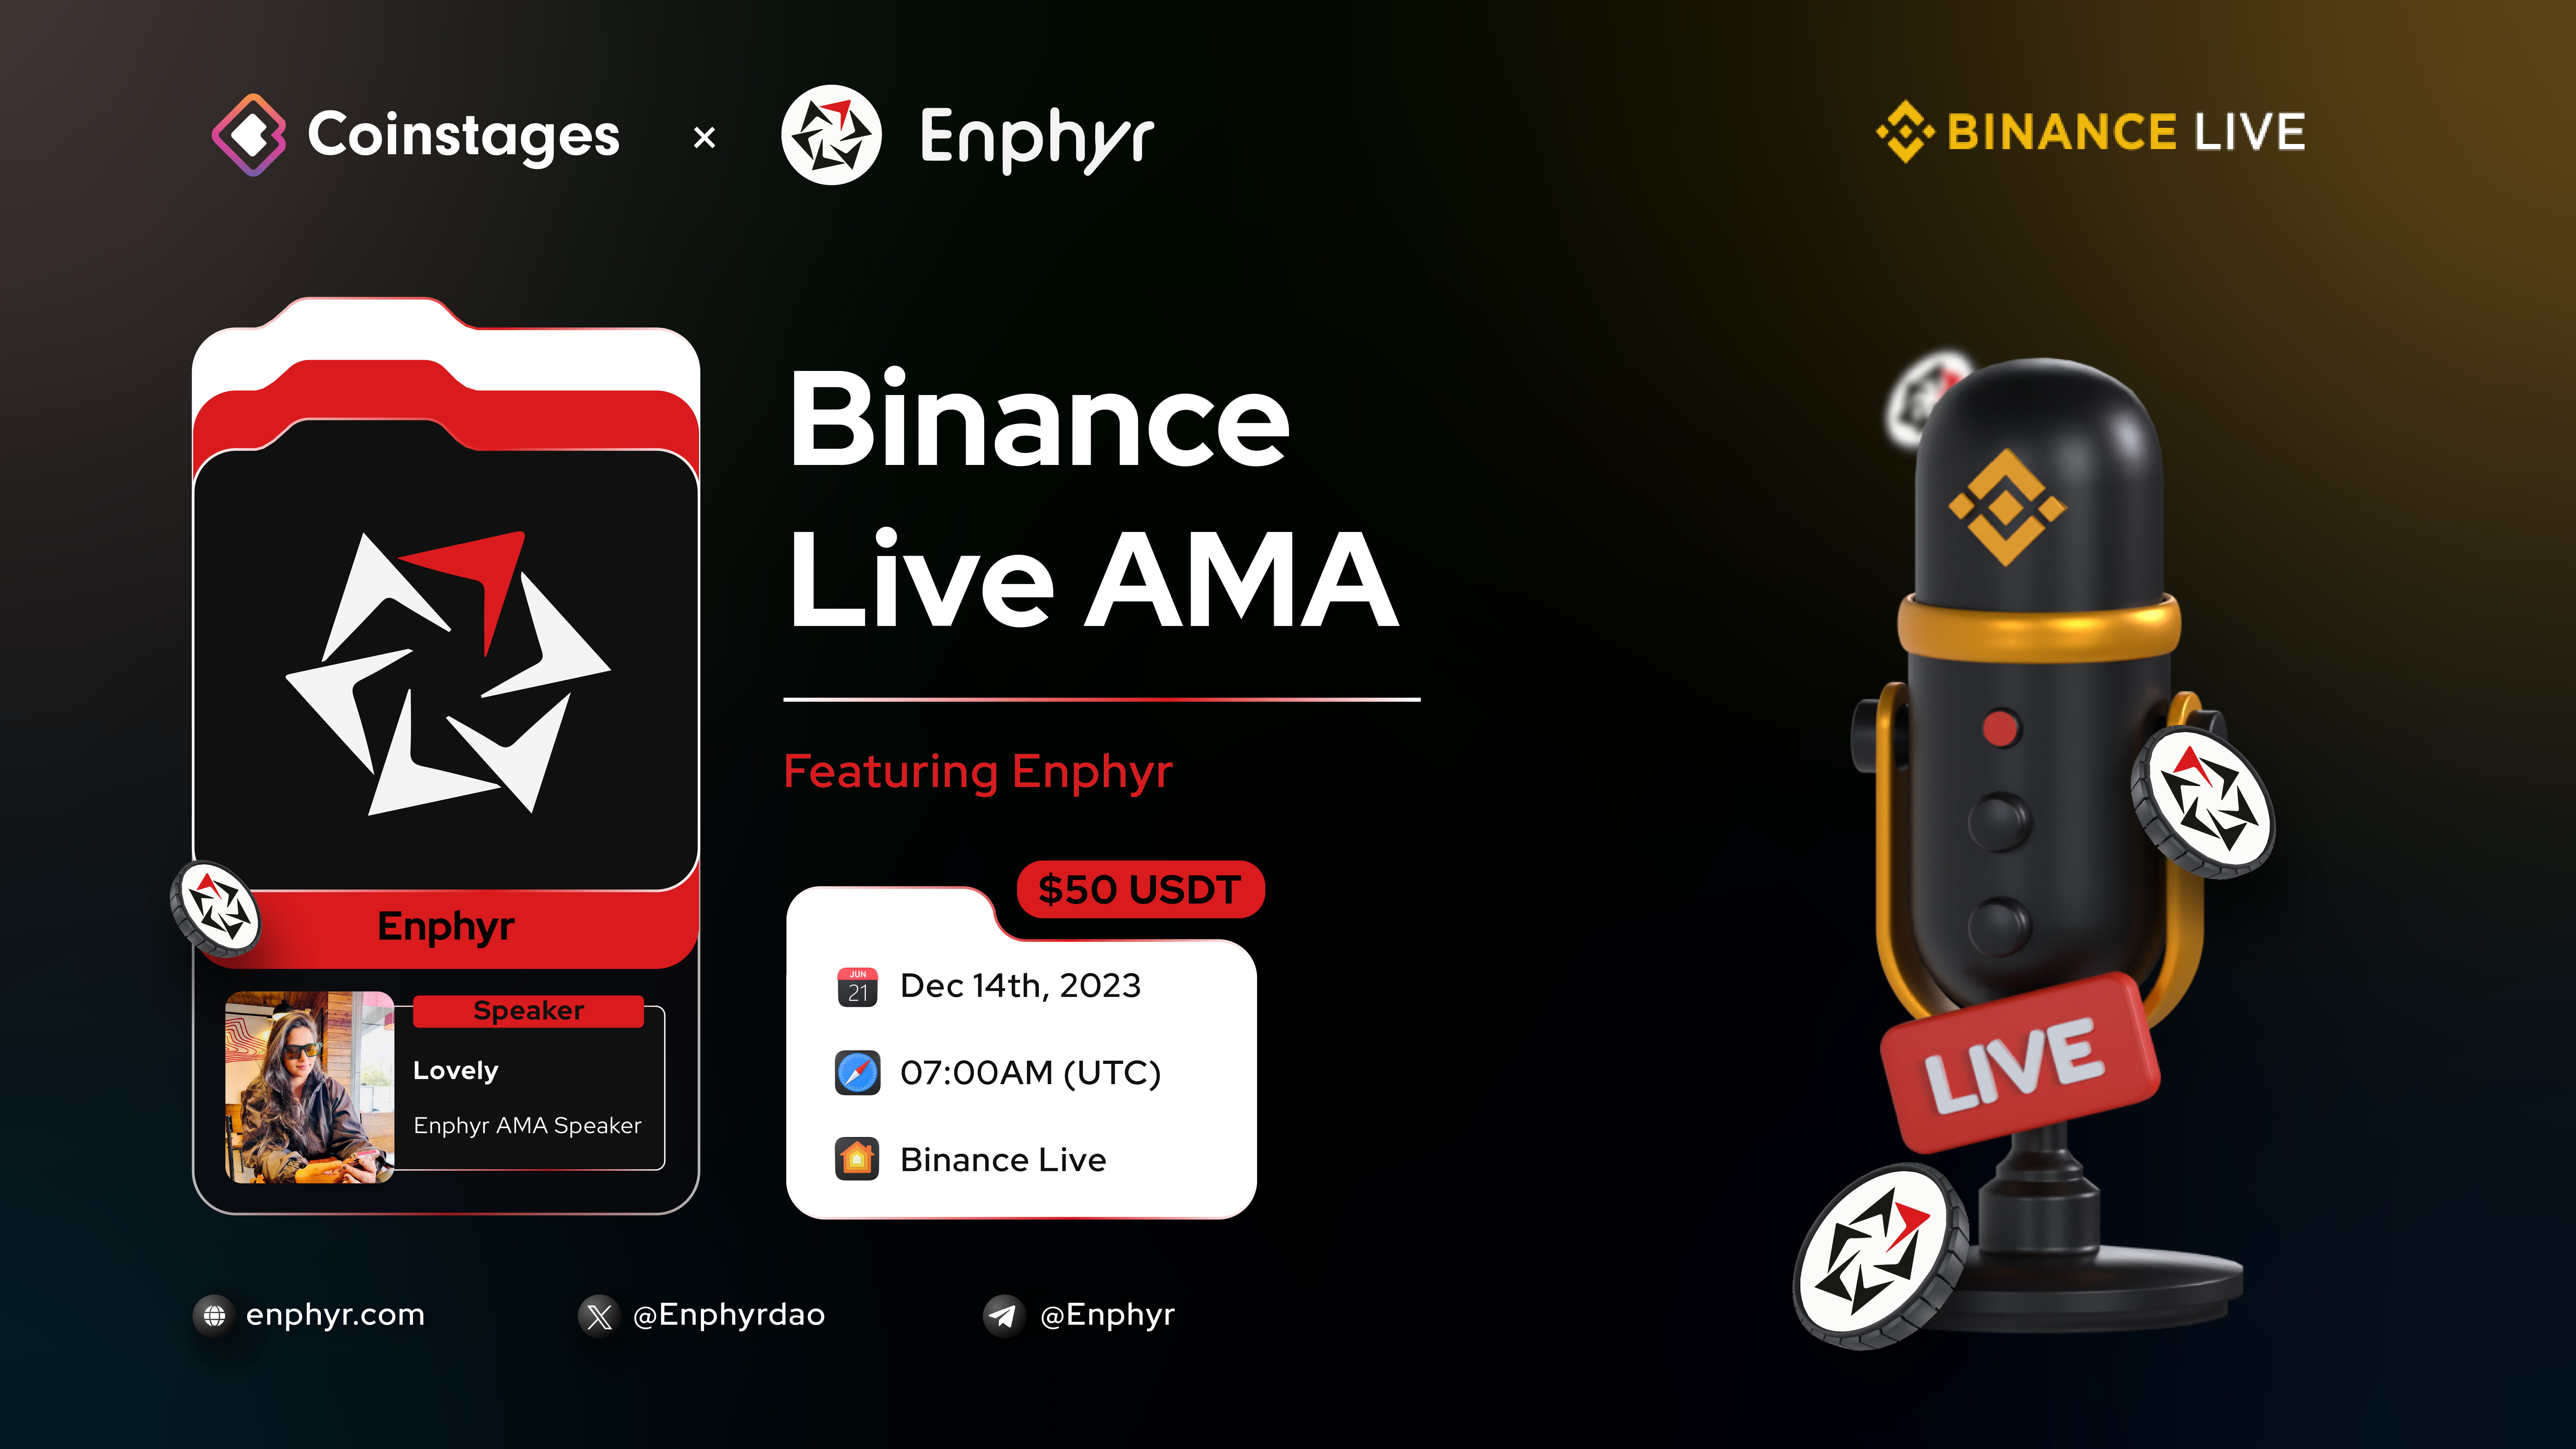 Coinstages Live AMA: Featuring Enphyr